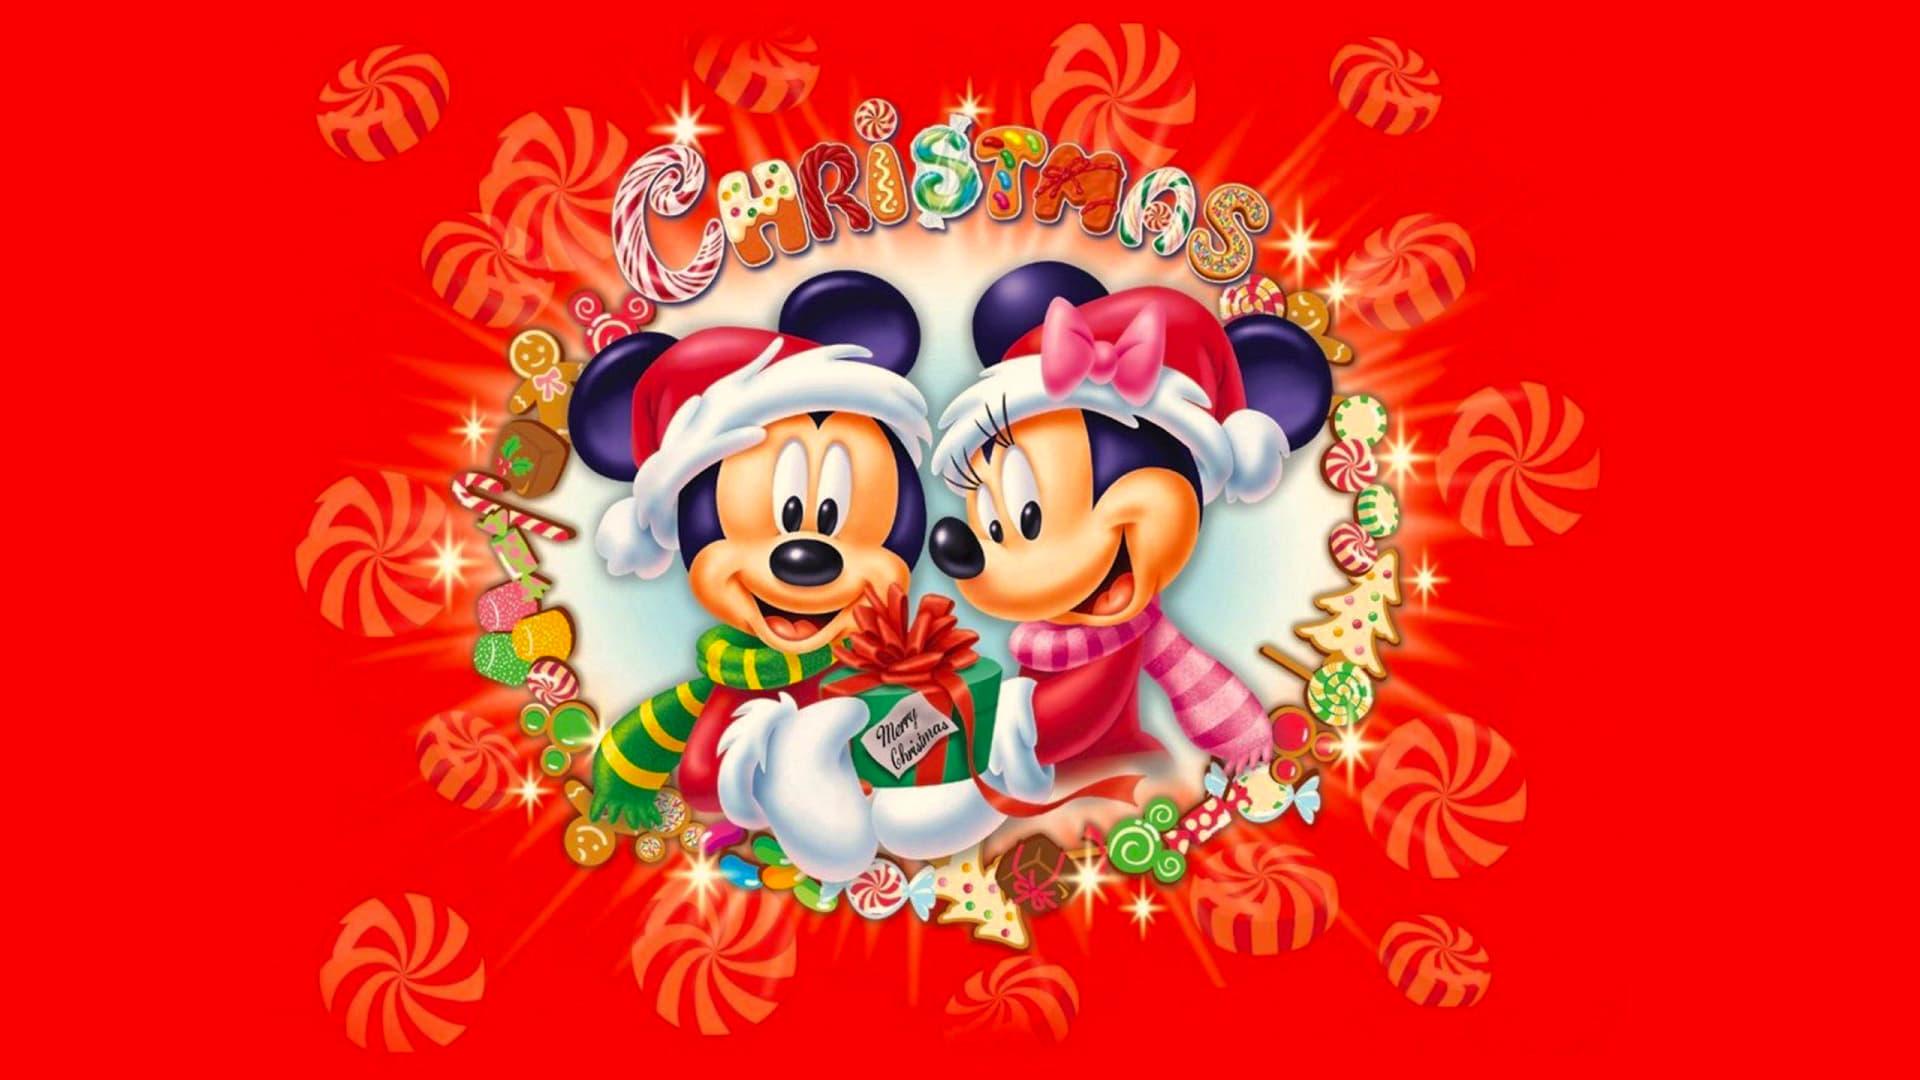 Classic Cartoon Favorites Volume 8: Holiday Celebration with Mickey and Pals backdrop